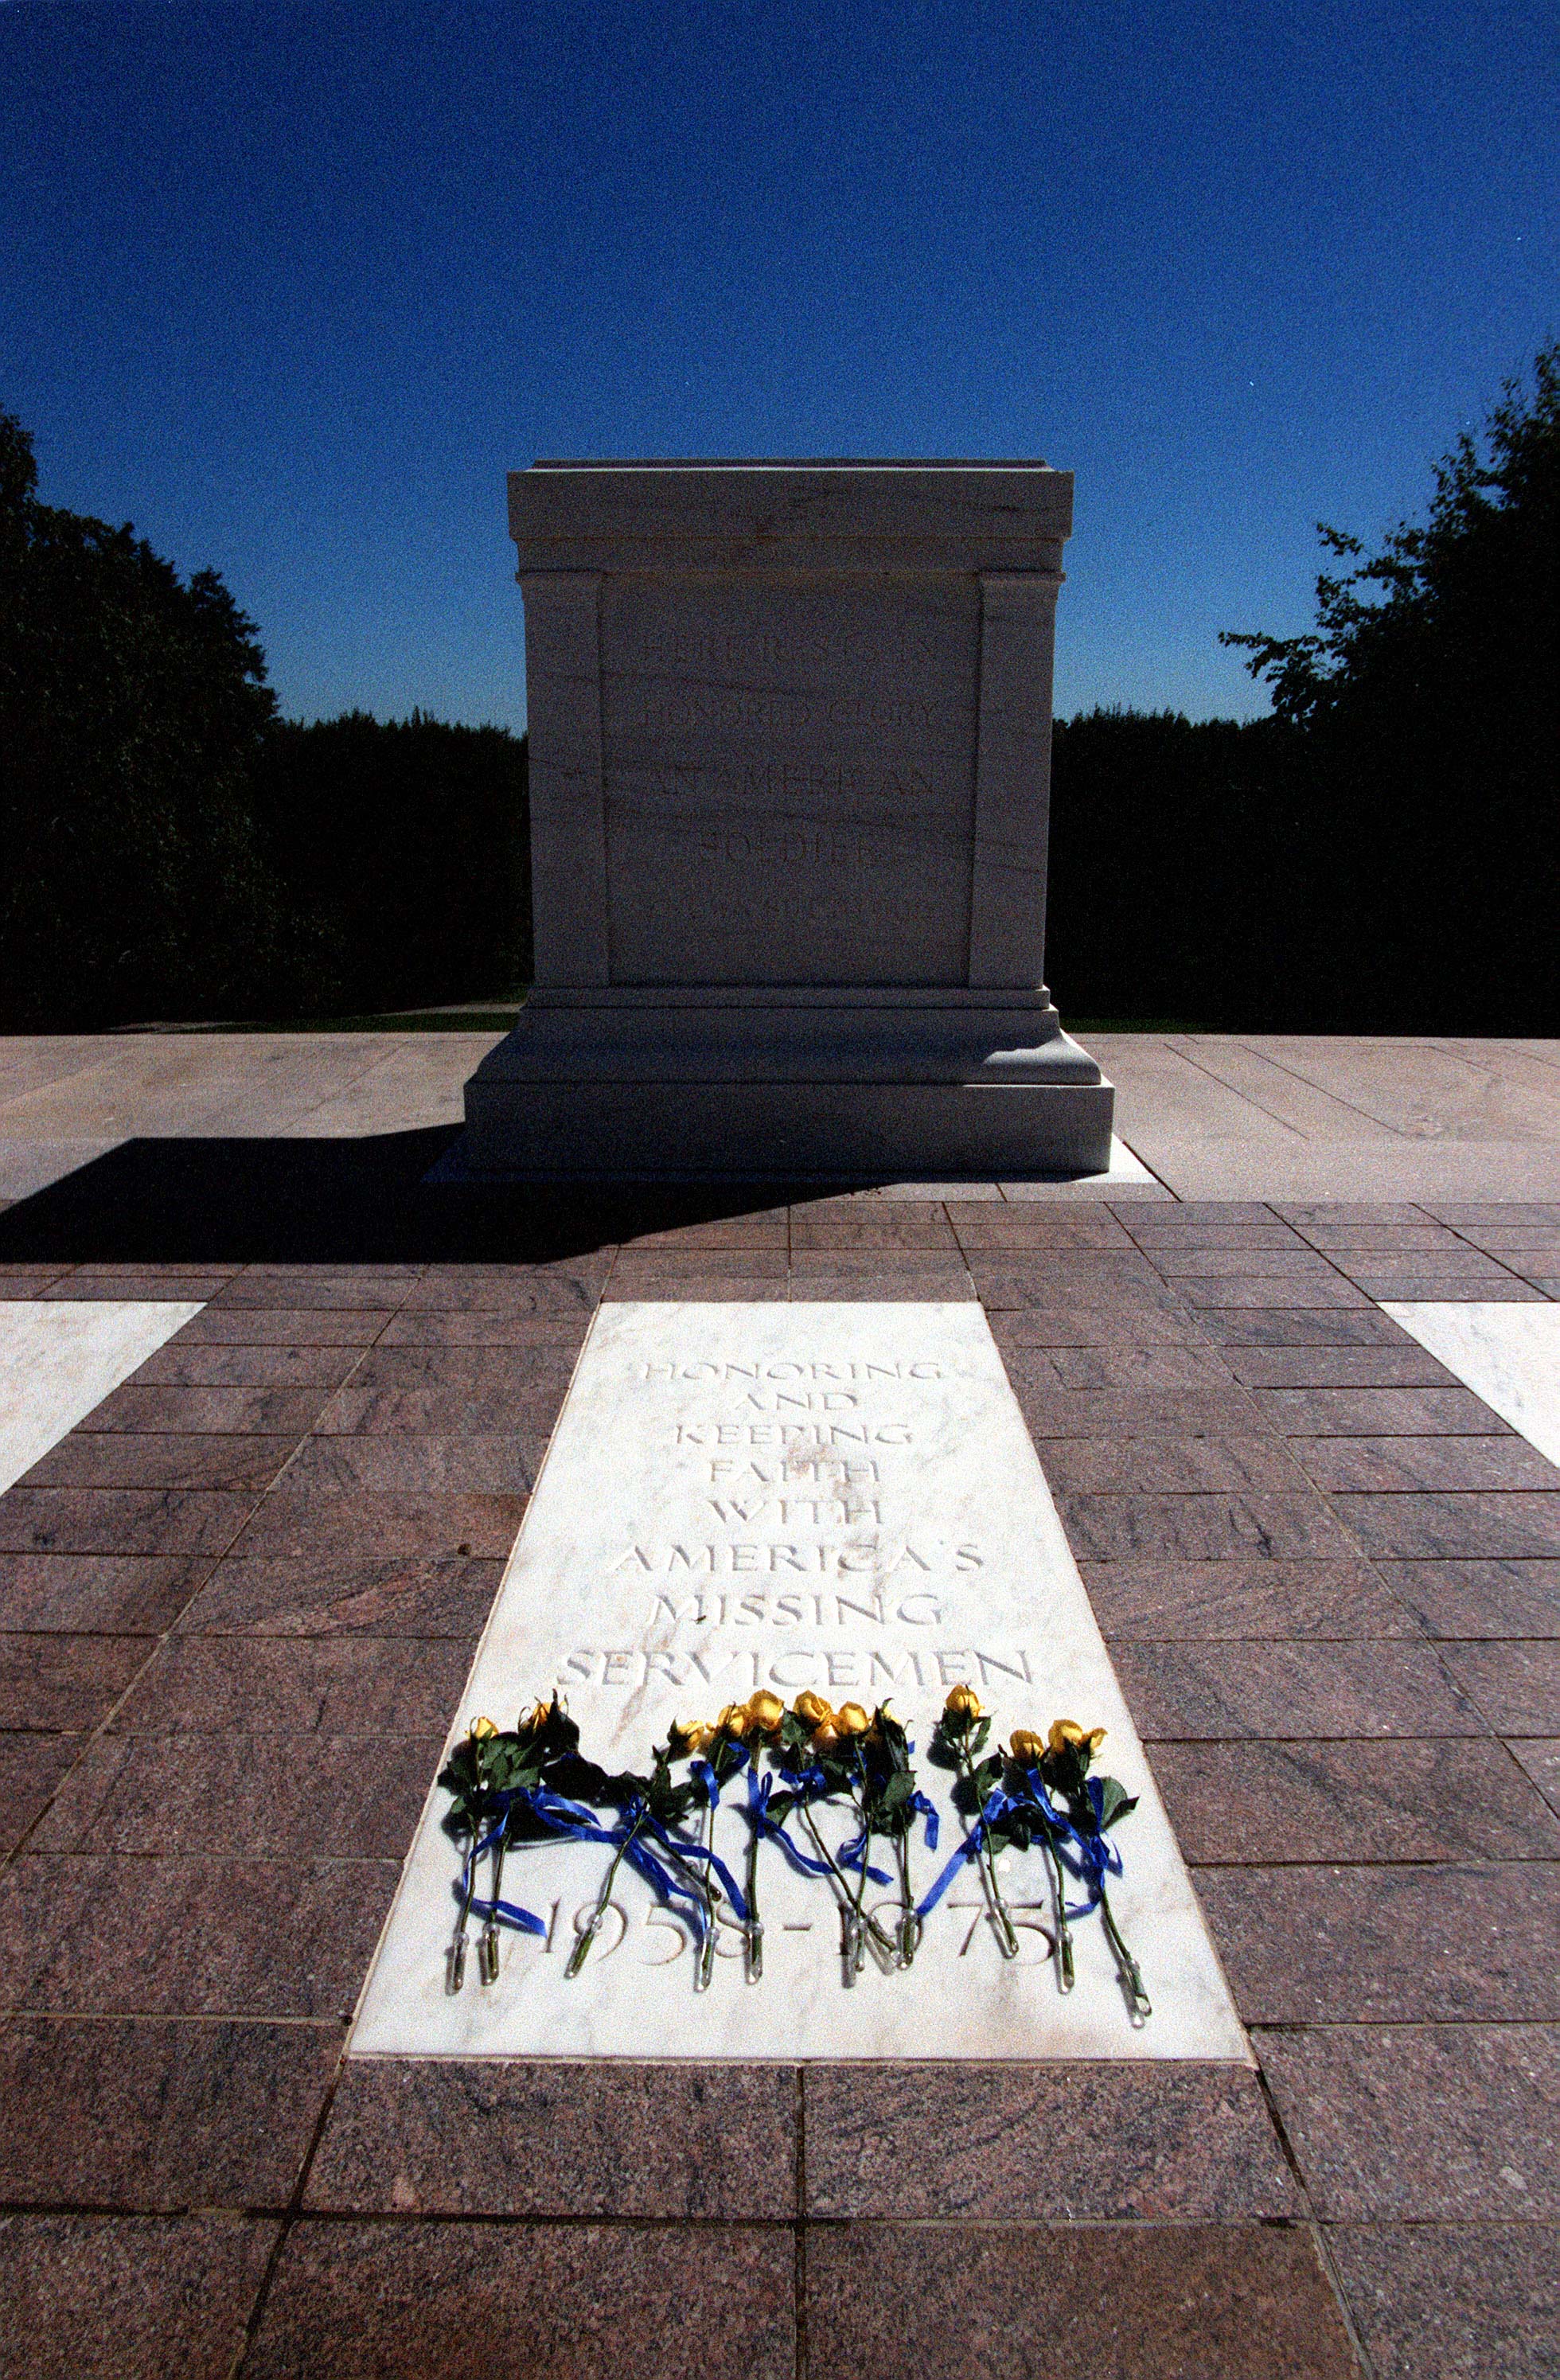  990917-D-2987S-069
	Yellow roses are placed at the base of the empty Vietnam Unknown Crypt where the inscription now reads "Honoring and Keeping Faith with America's Missing Servicemen 1958-1975".  The new inscription on the crypt is being dedicated